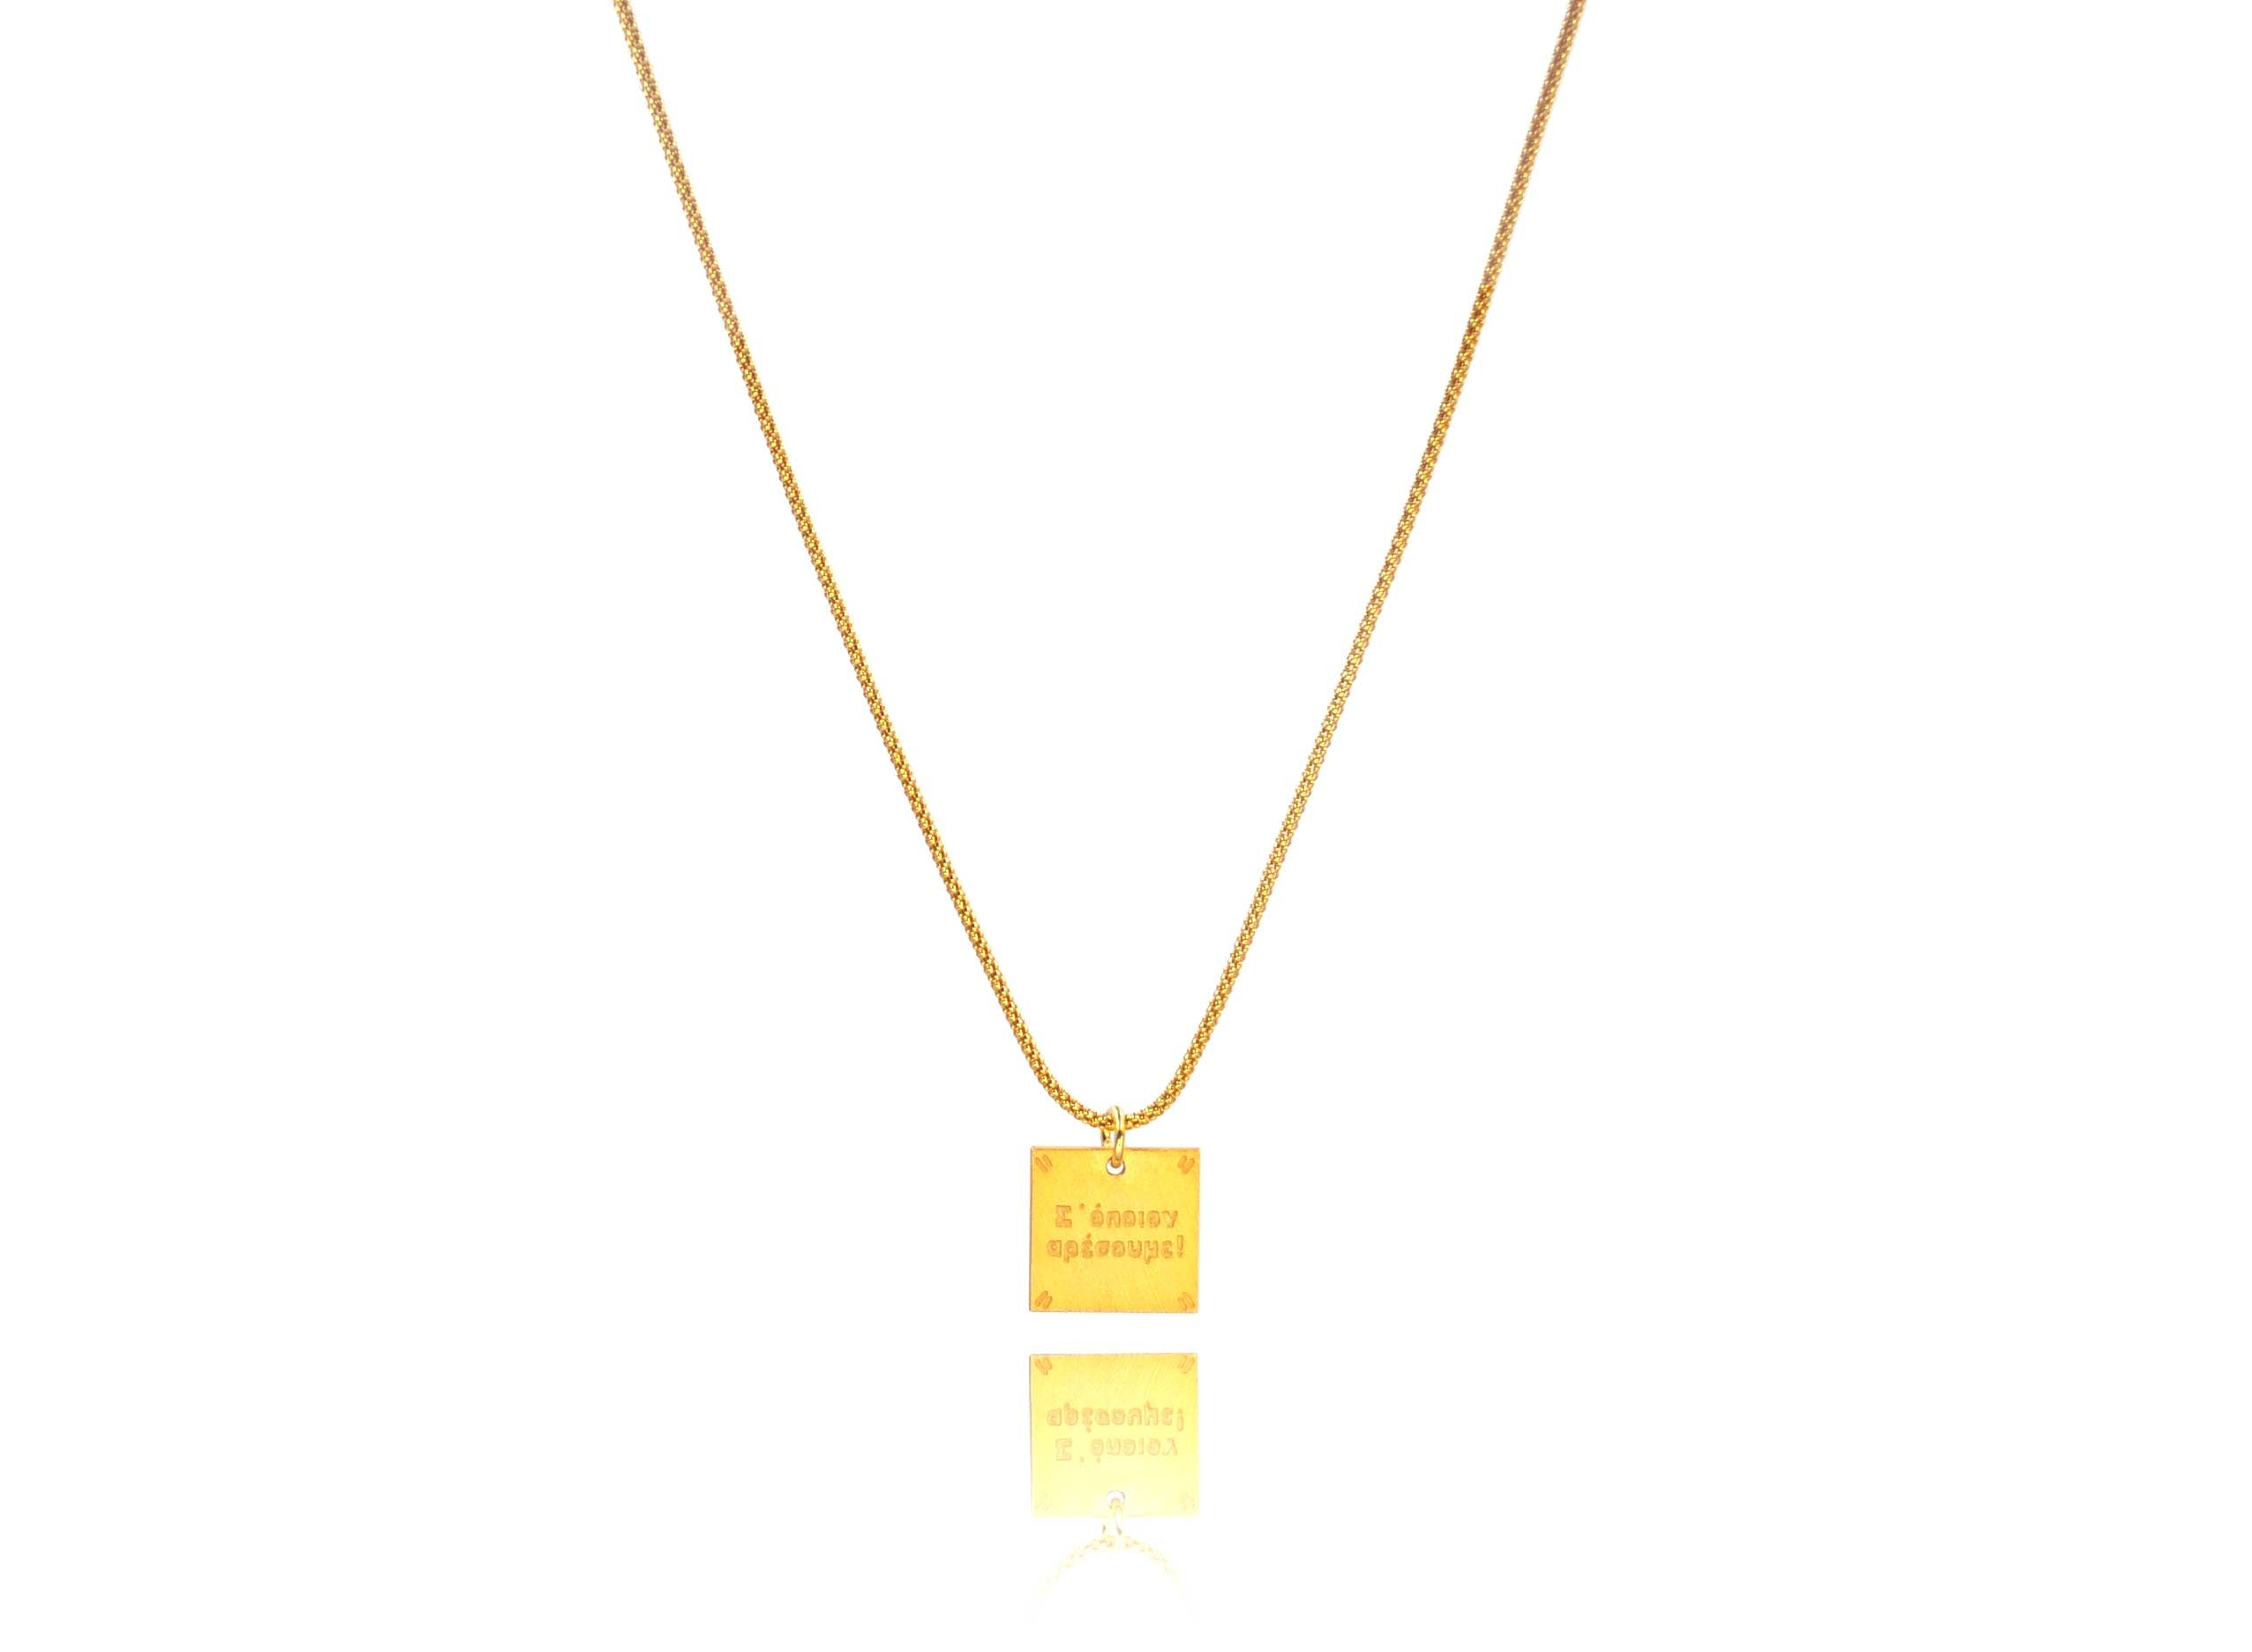 A necklace made of silver 925 gold plated chain and a squared silver 925 charm plated in gold 24K, with a message ´´Whoever likes us-Σ΄όποιον αρέσουμε'' .